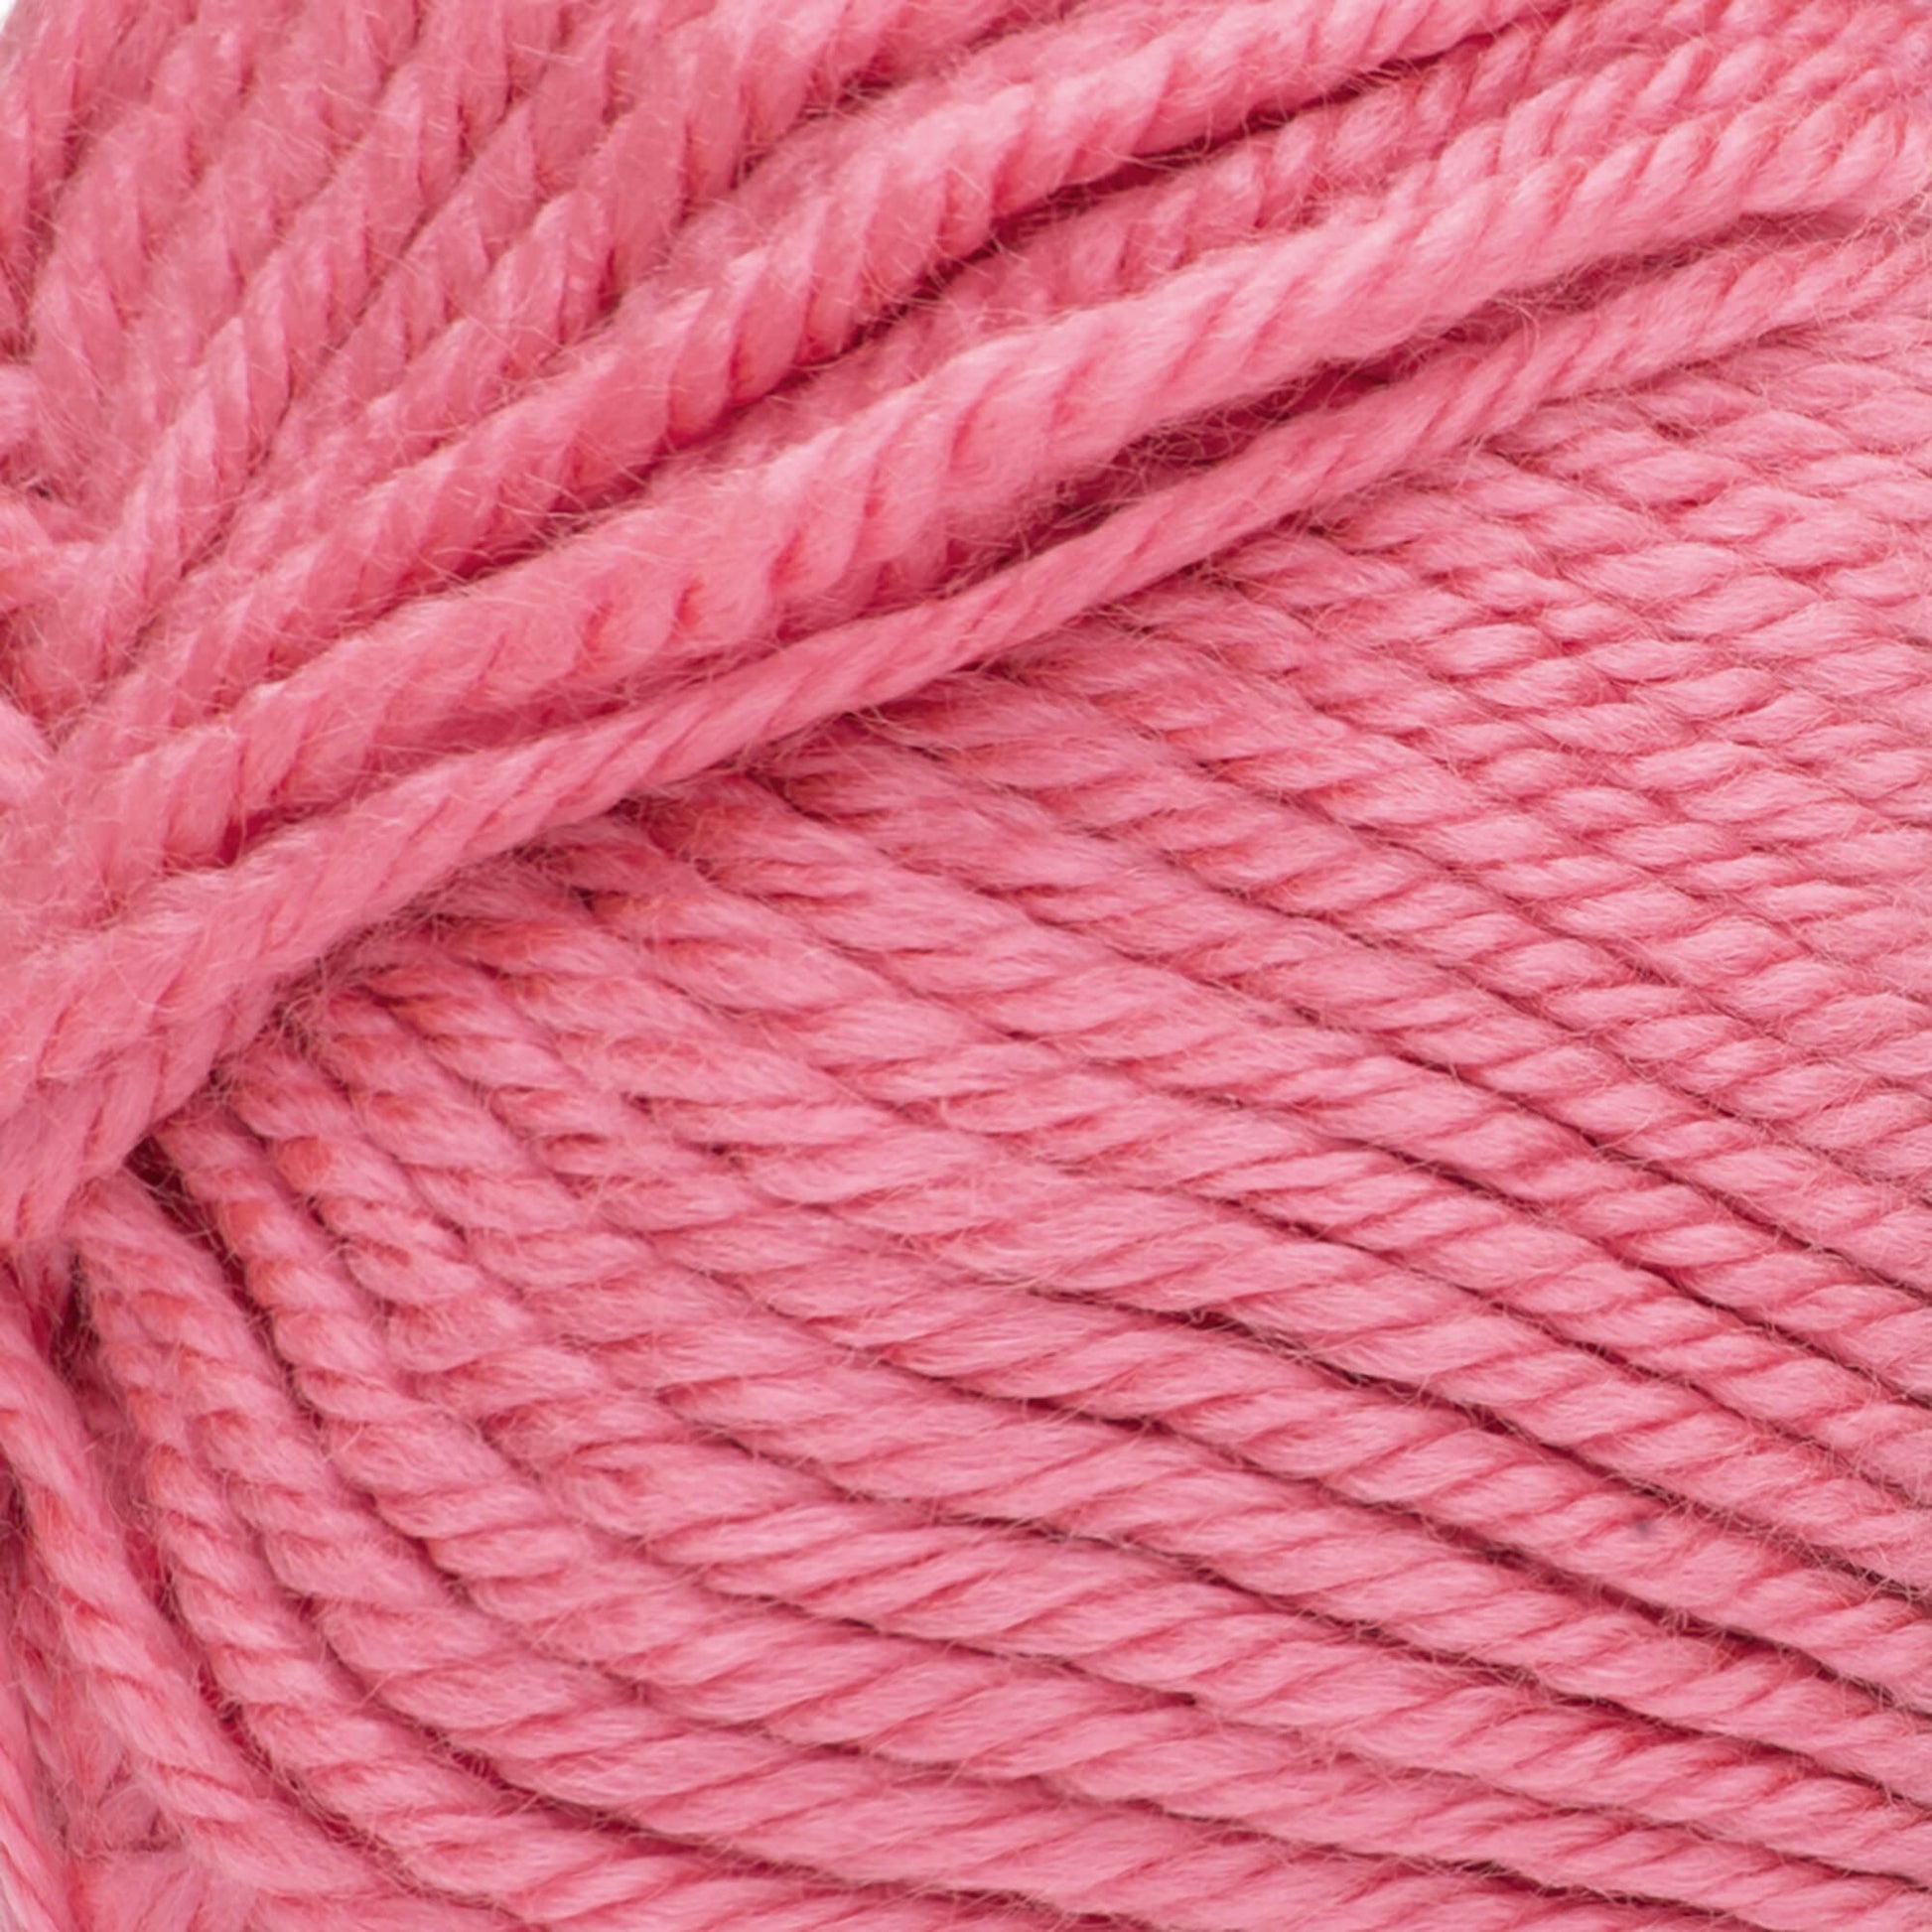 Red Heart Soft Baby Steps Yarn - Discontinued Shades